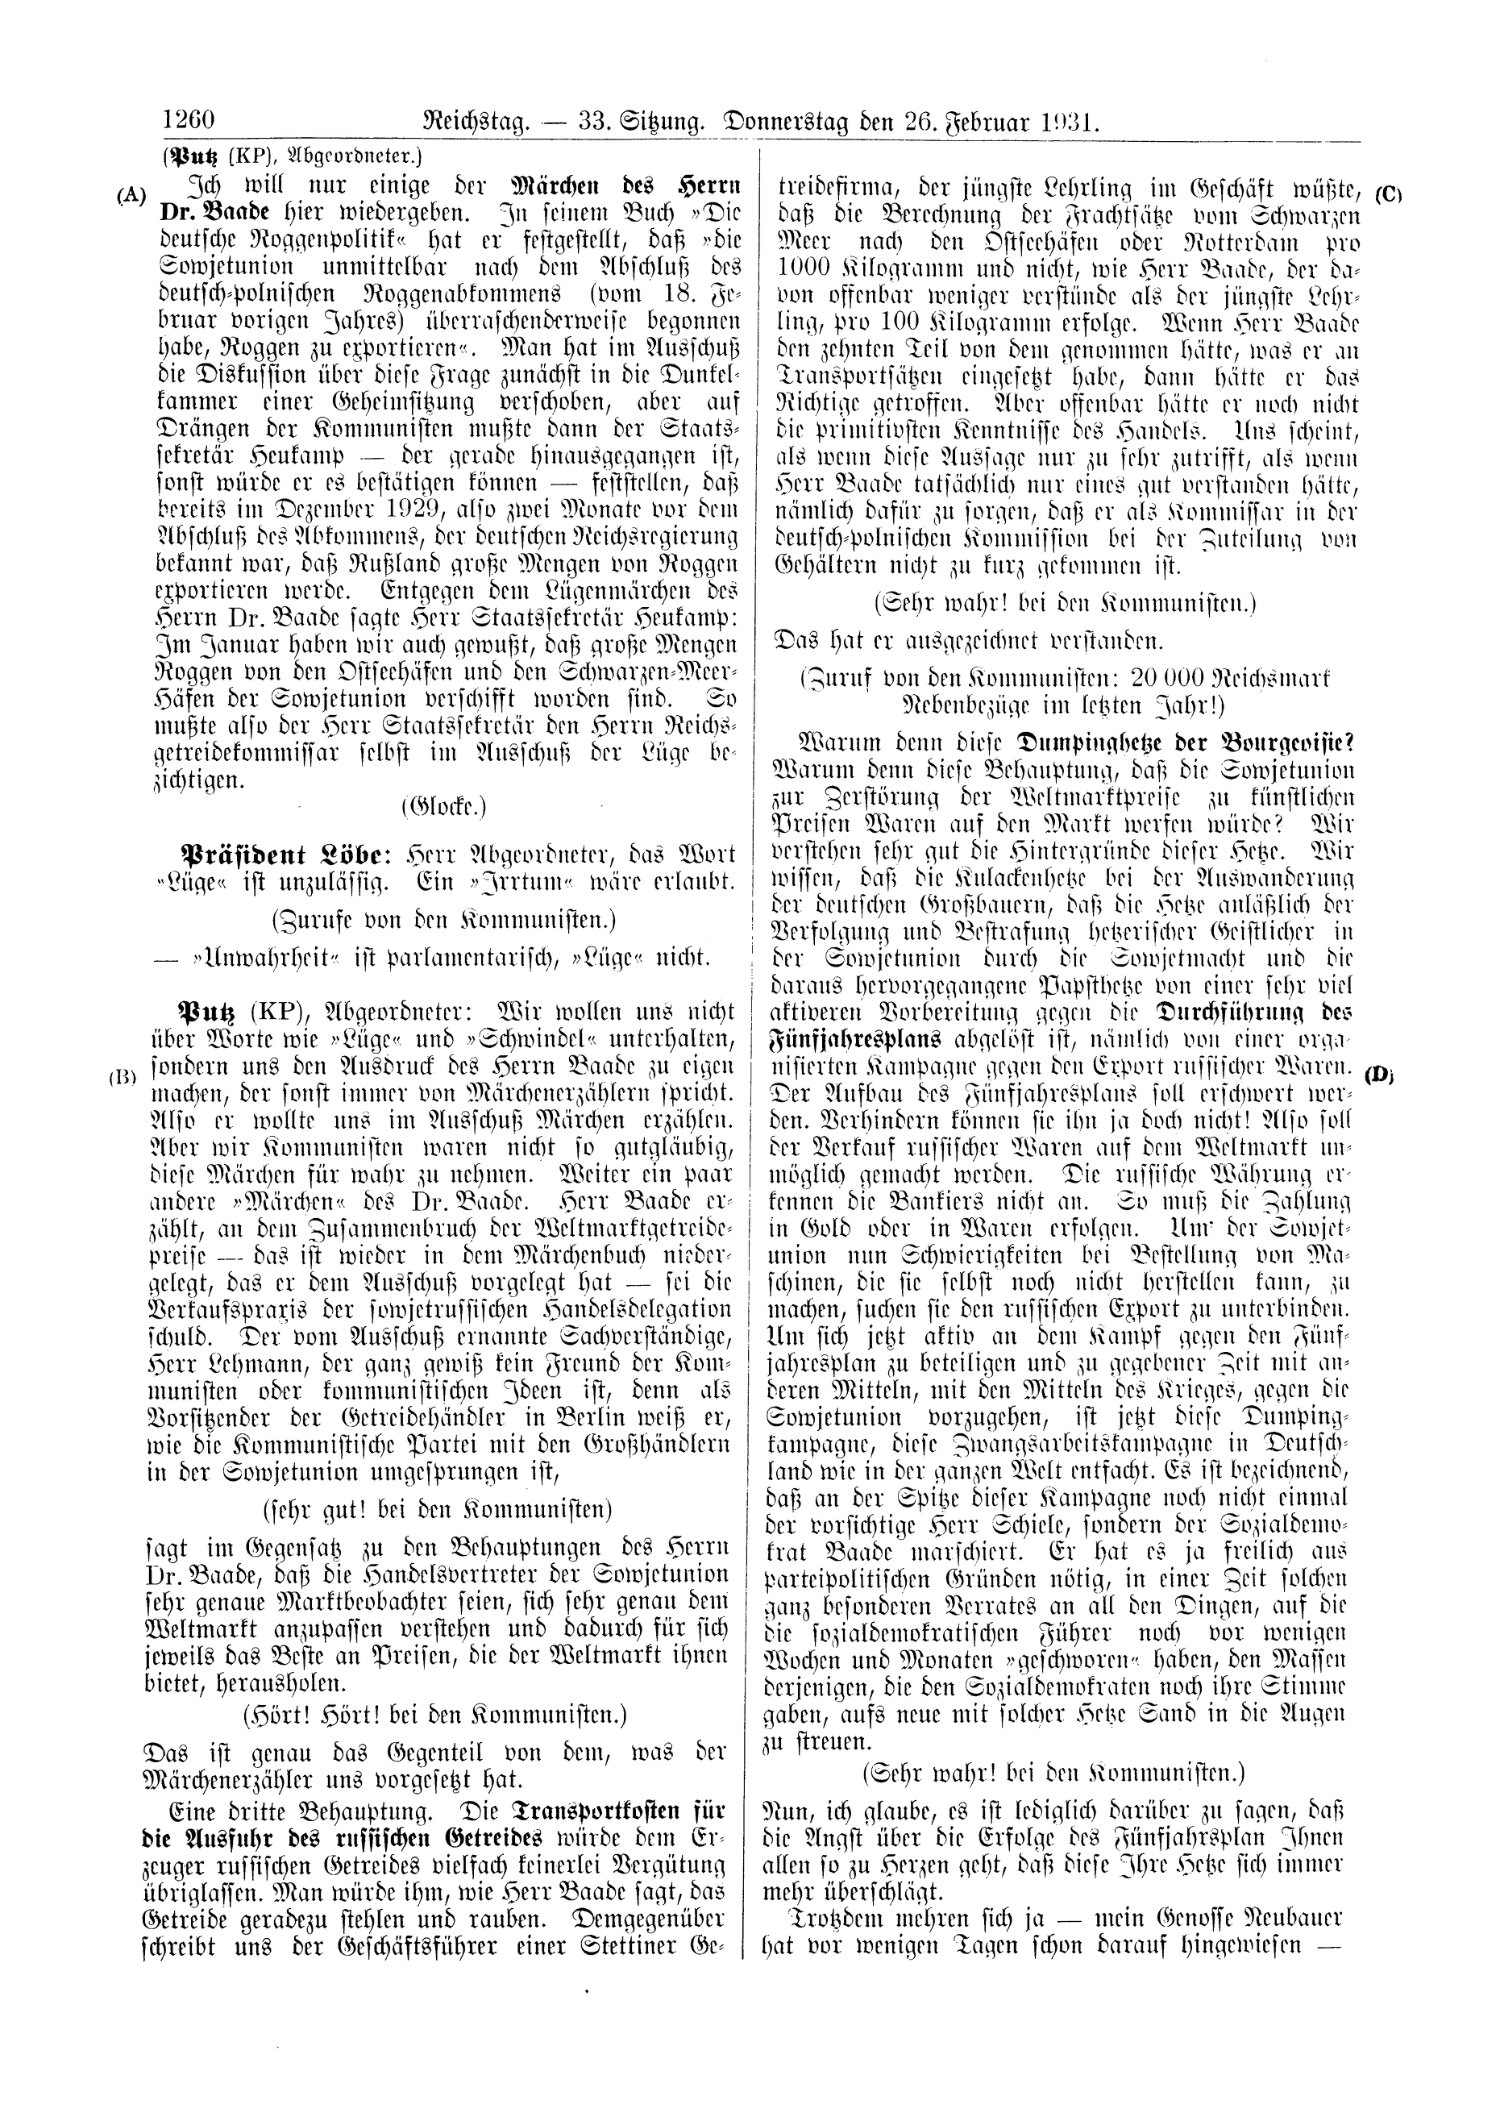 Scan of page 1260